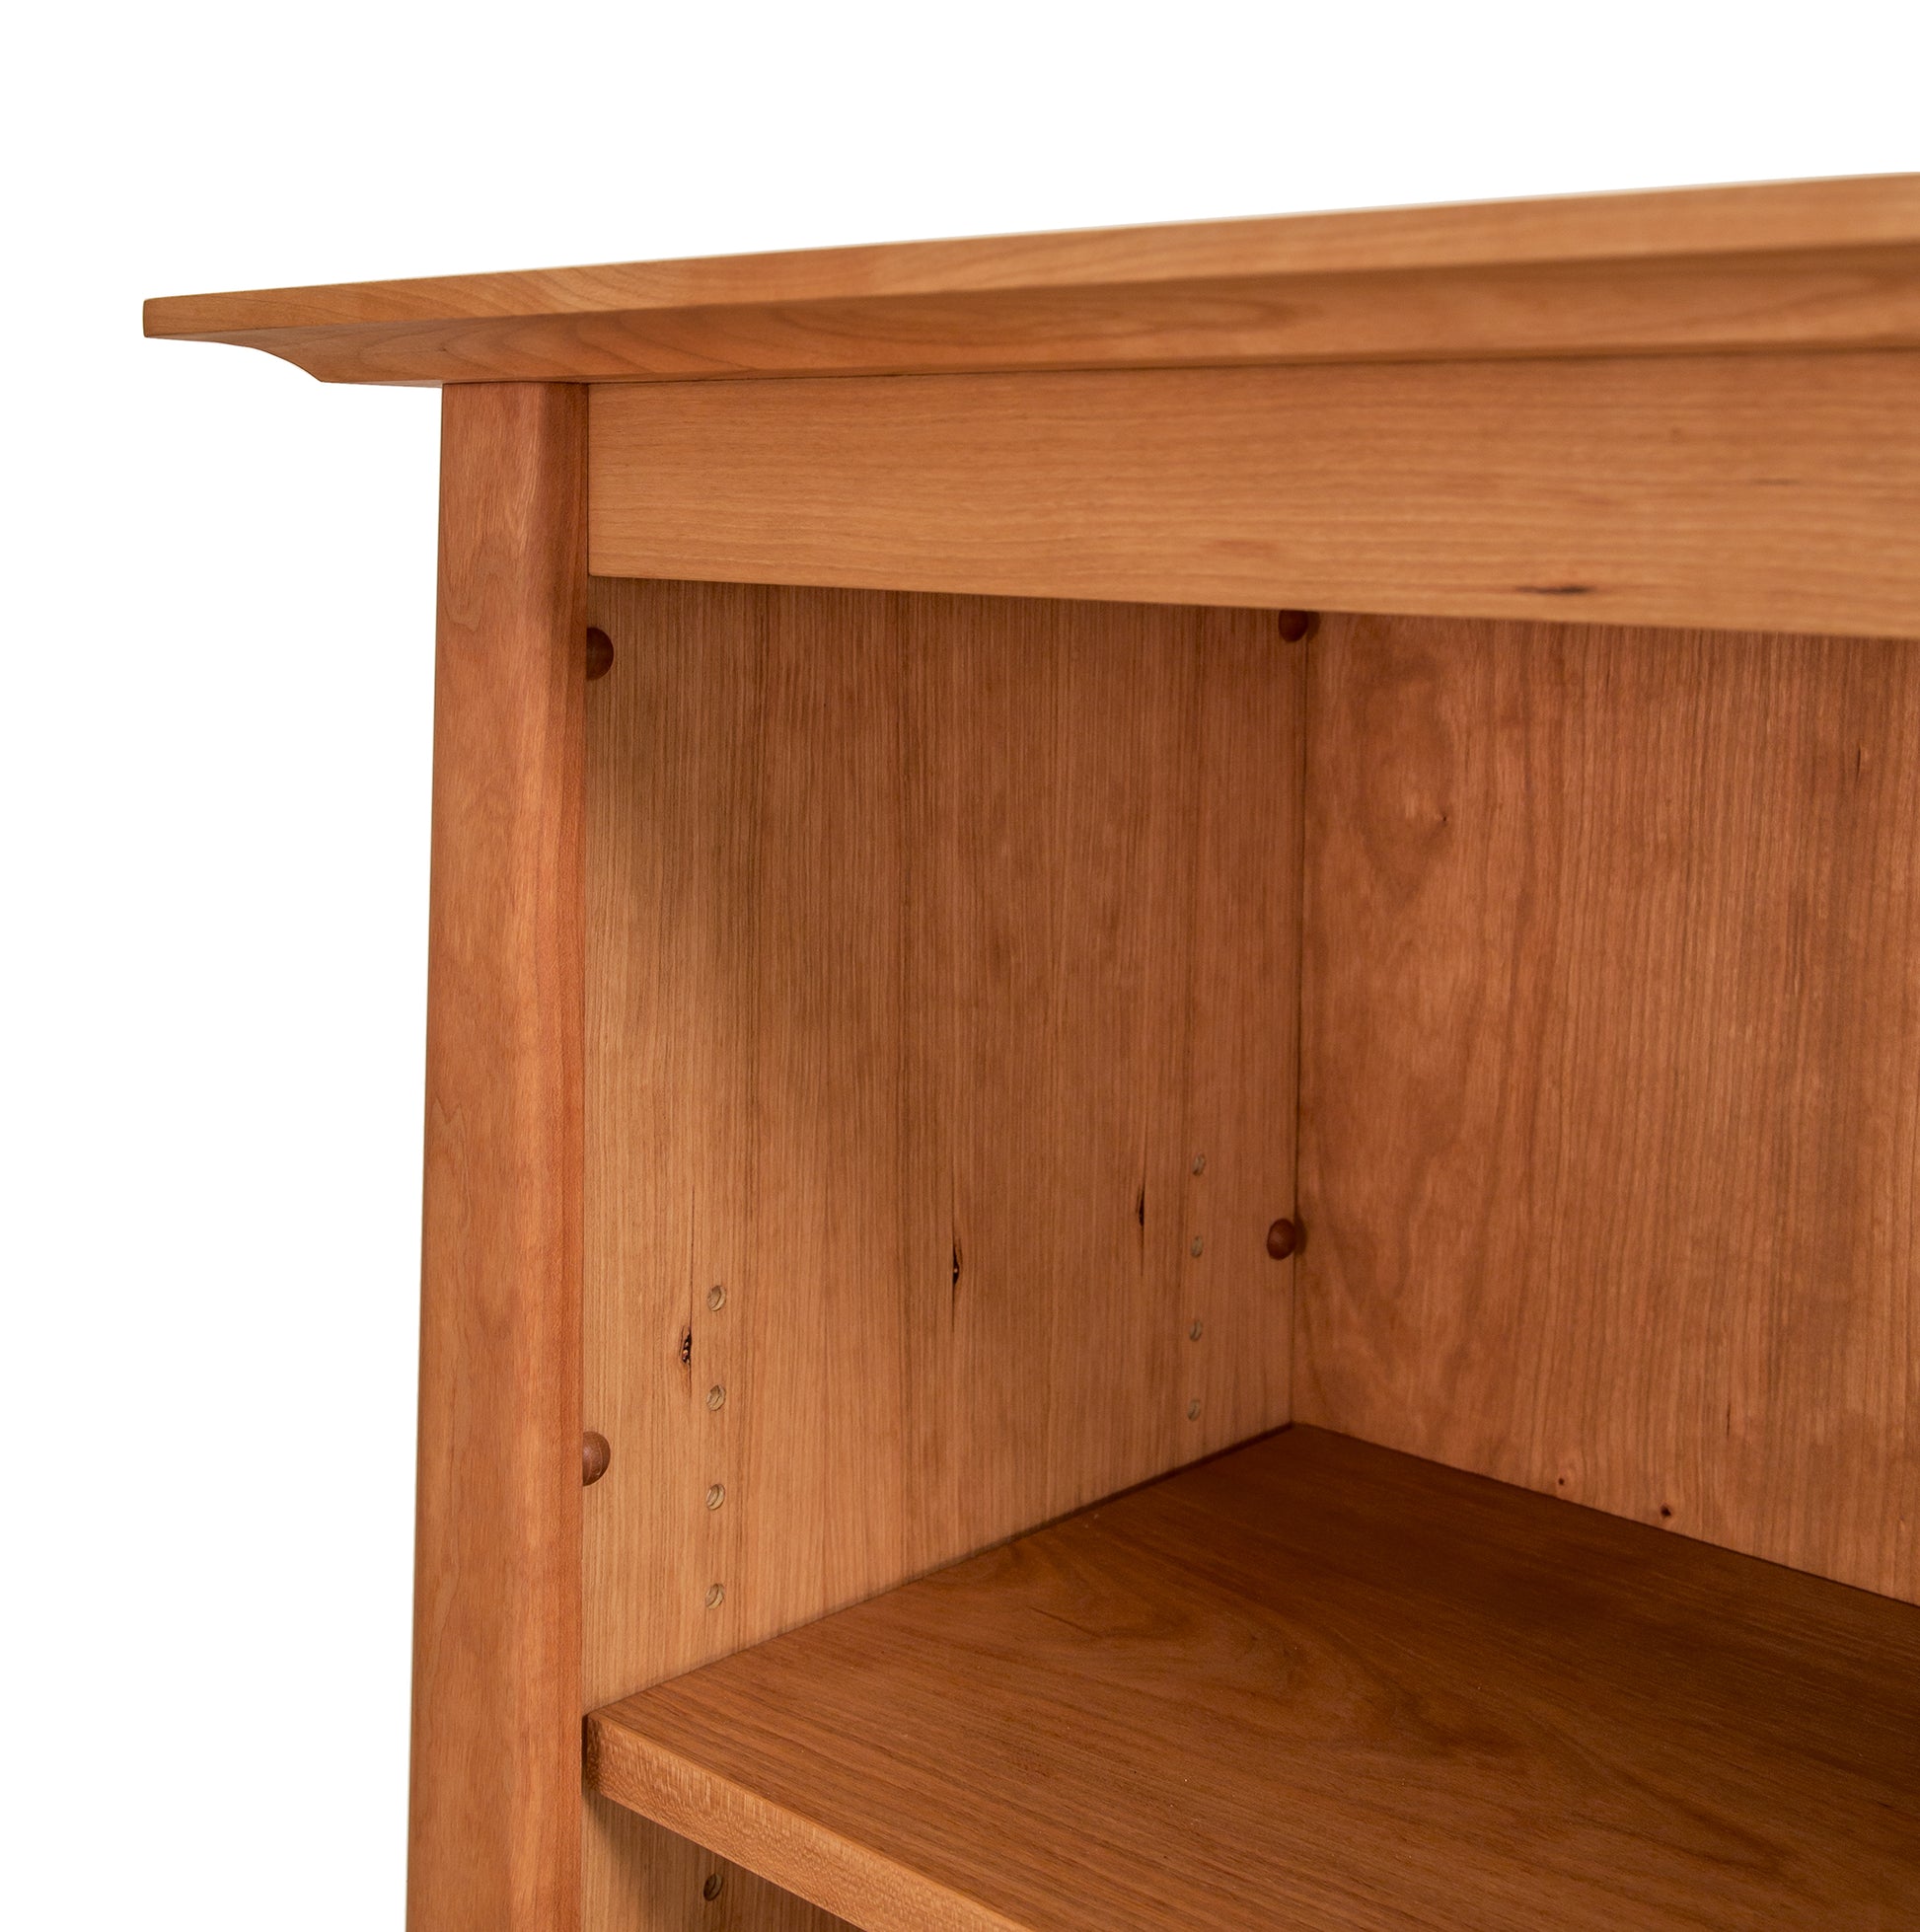 Close-up of a Cherry Moon Bookcase corner from Maple Corner Woodworks, crafted from sustainably harvested hardwoods, showing the tabletop, a shelf, and the end panel with visible wood grain and fastening hardware holes.